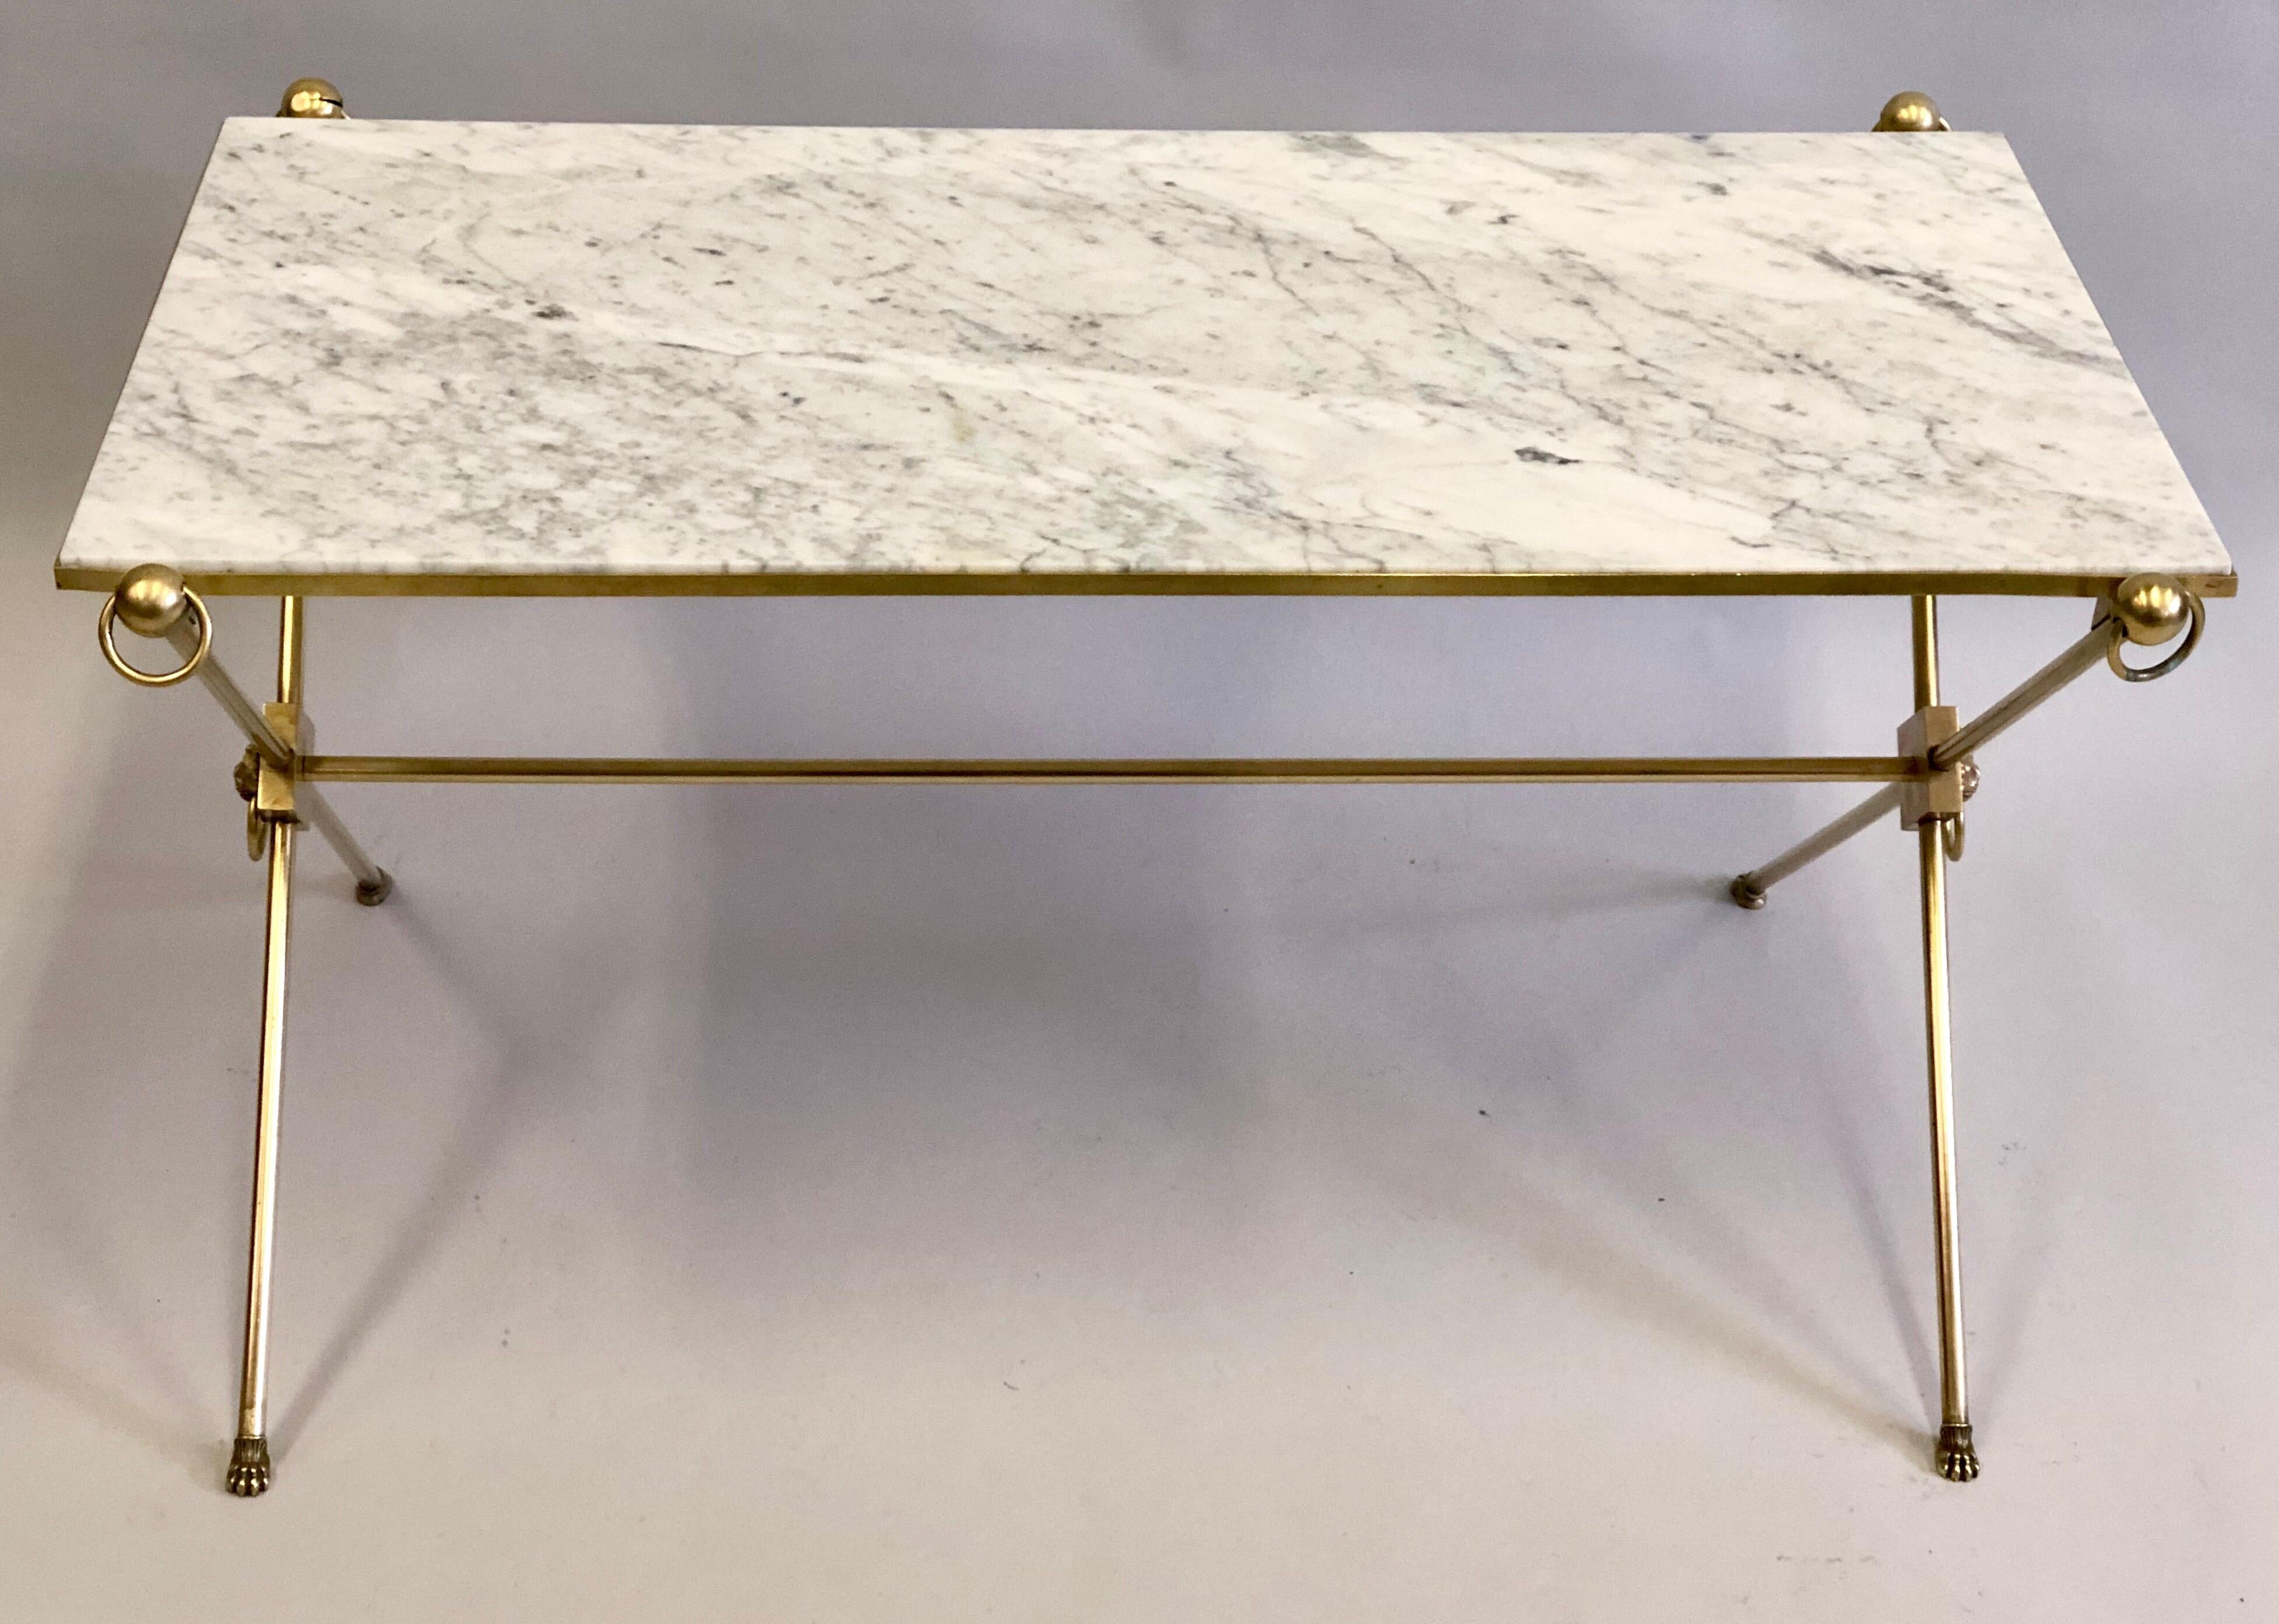 Louis XVI French Modern Neoclassical Brass and Marble Coffee Table by Maison Jansen